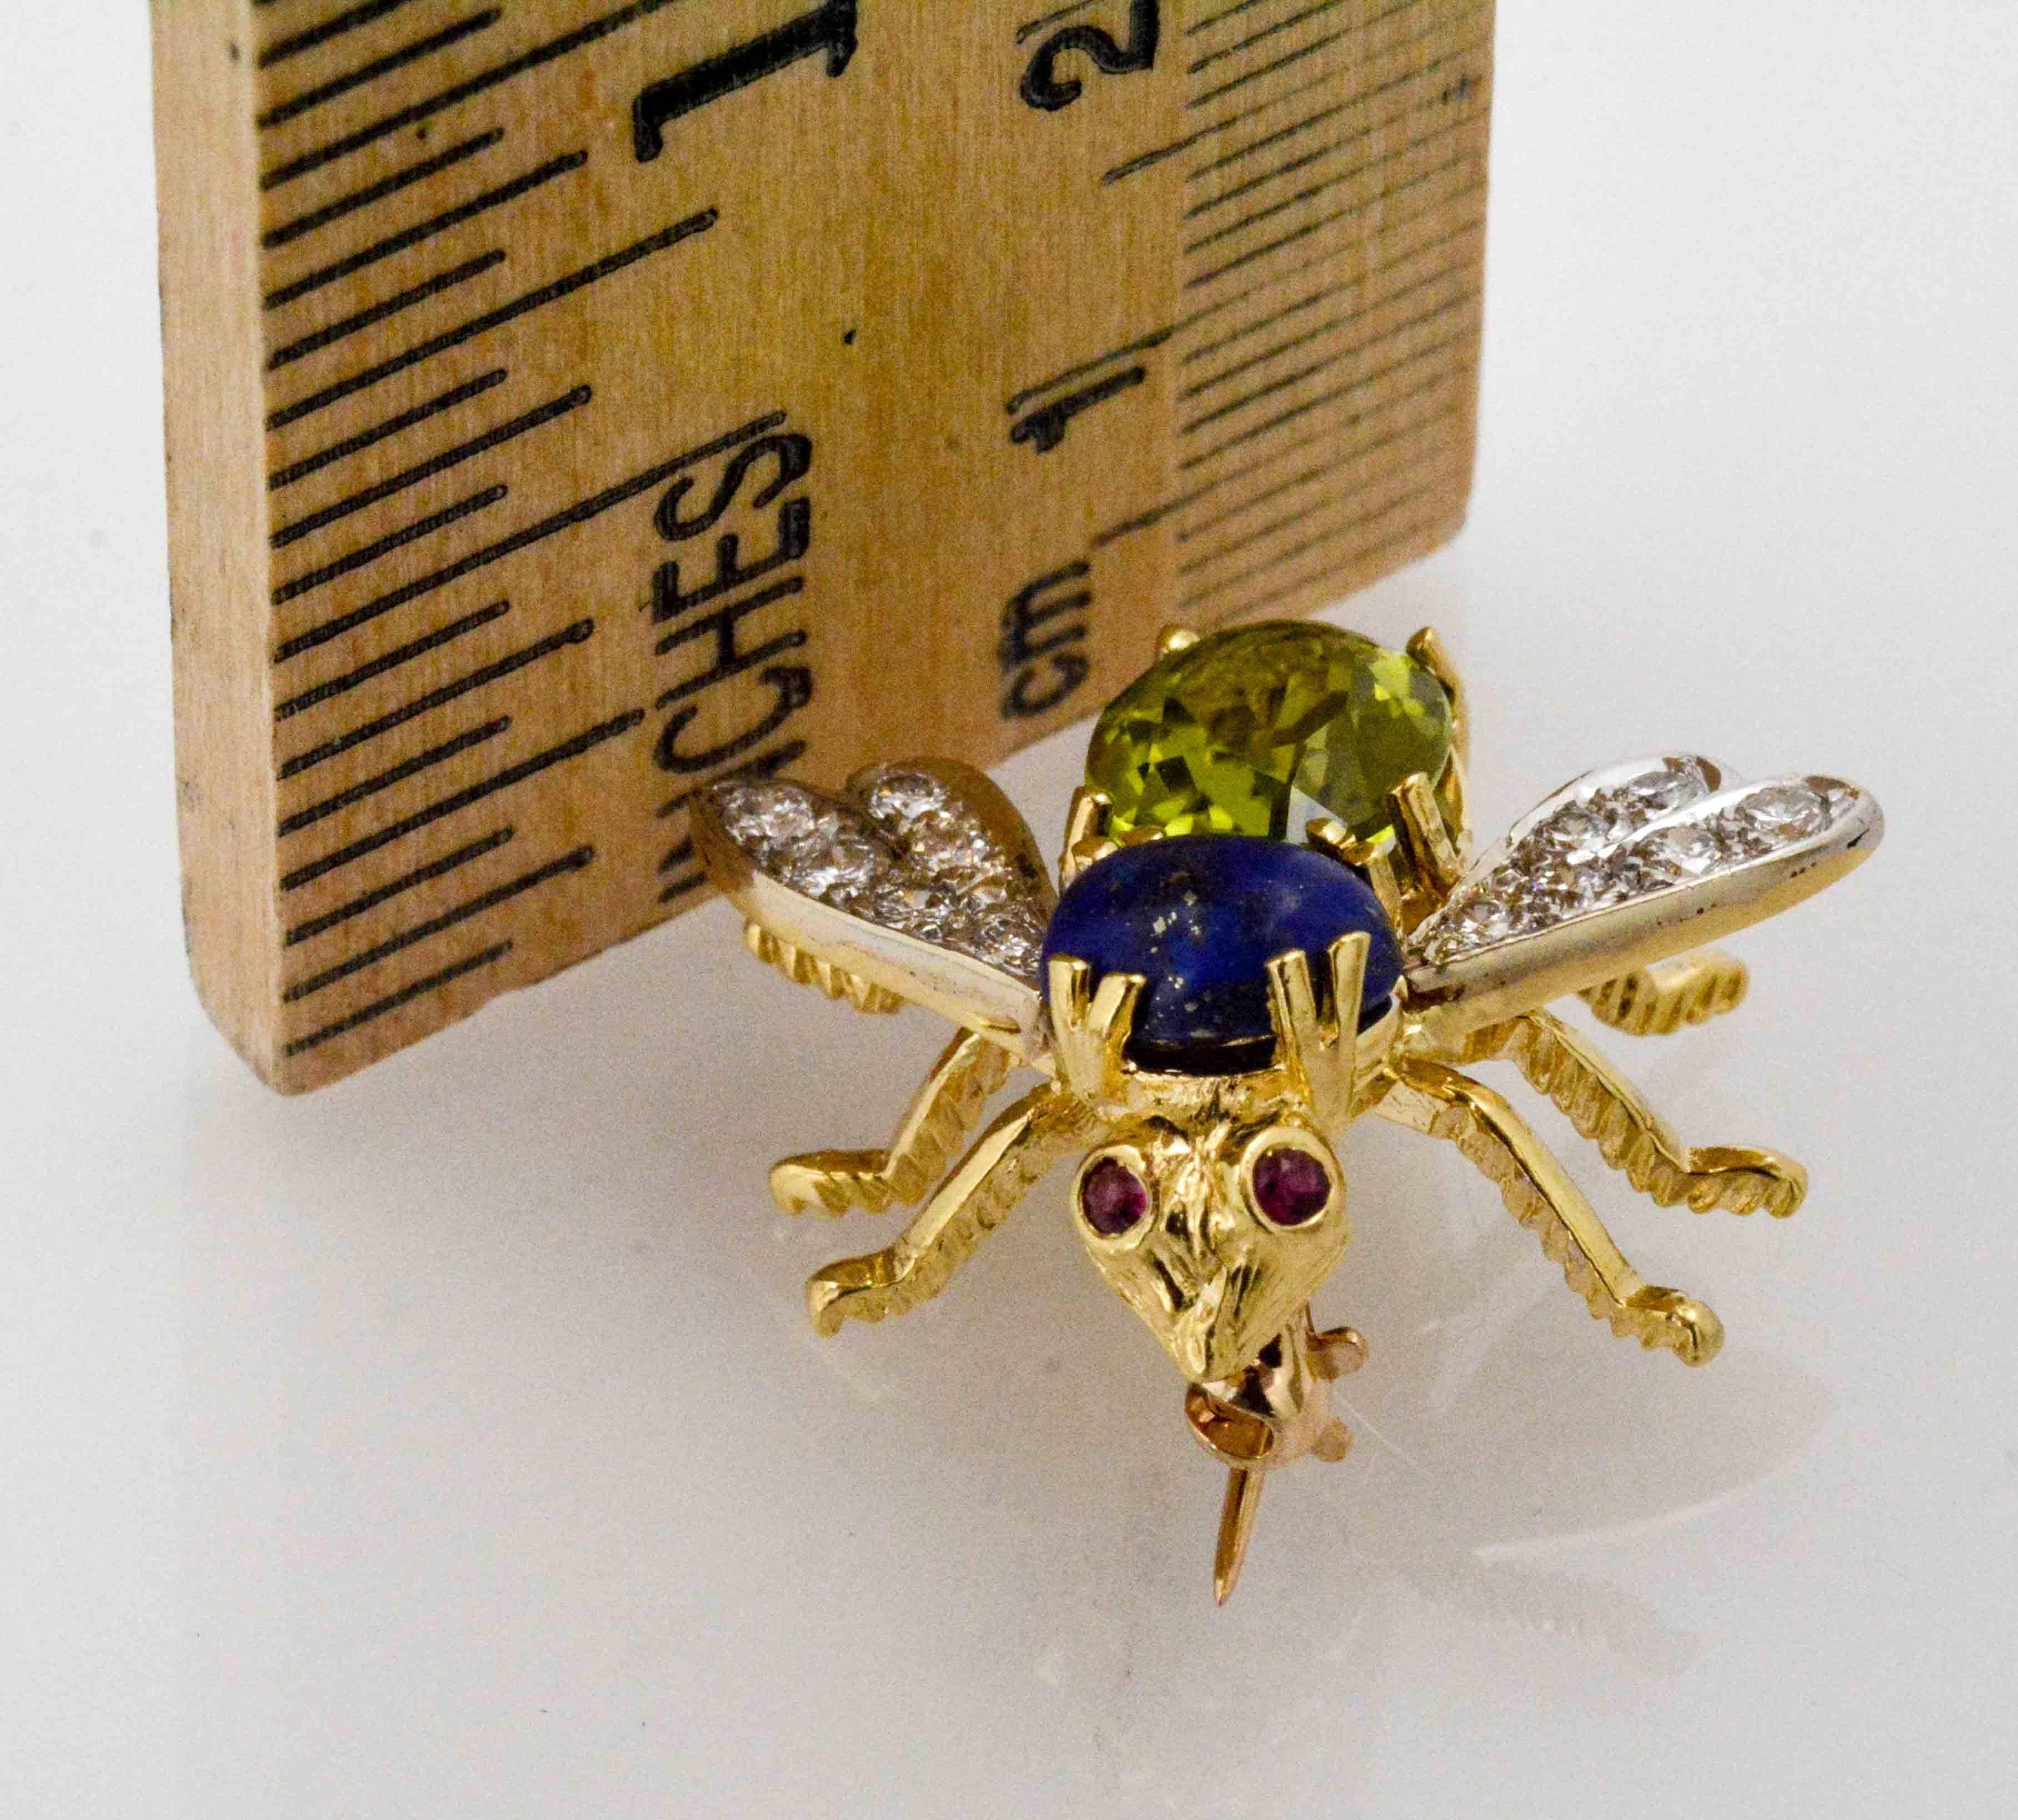 Ready to land on your lapel is this expertly handcrafted 14 Karat yellow gold Herbert Rosenthal Bee pin. This adorable modern style 1960's bee brooch has an oval blue lapis and 1.89 carat oval green peridot body, round ruby eyes and pave set diamond